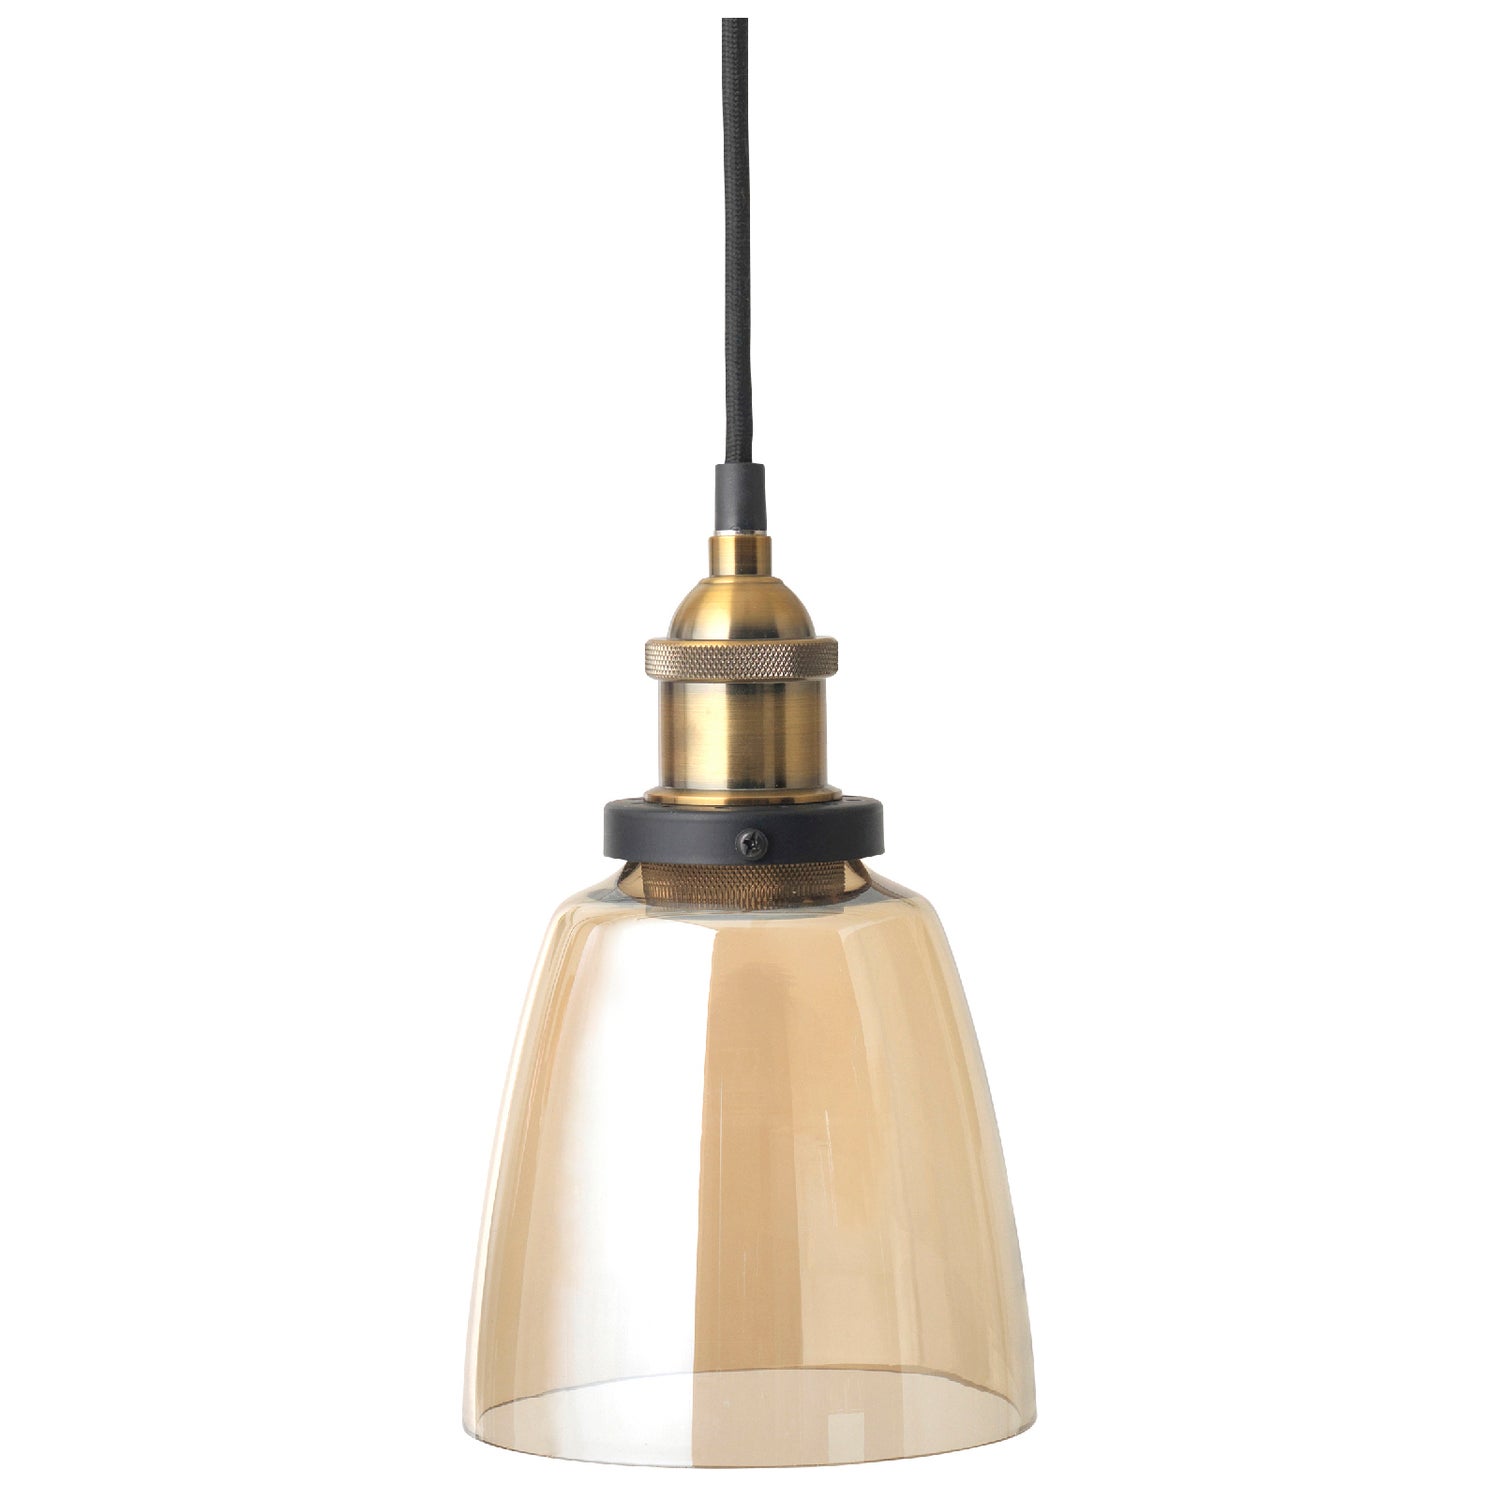 Broste Copenhagen Isac Glass Ceiling Lamp - Free UK Delivery Available